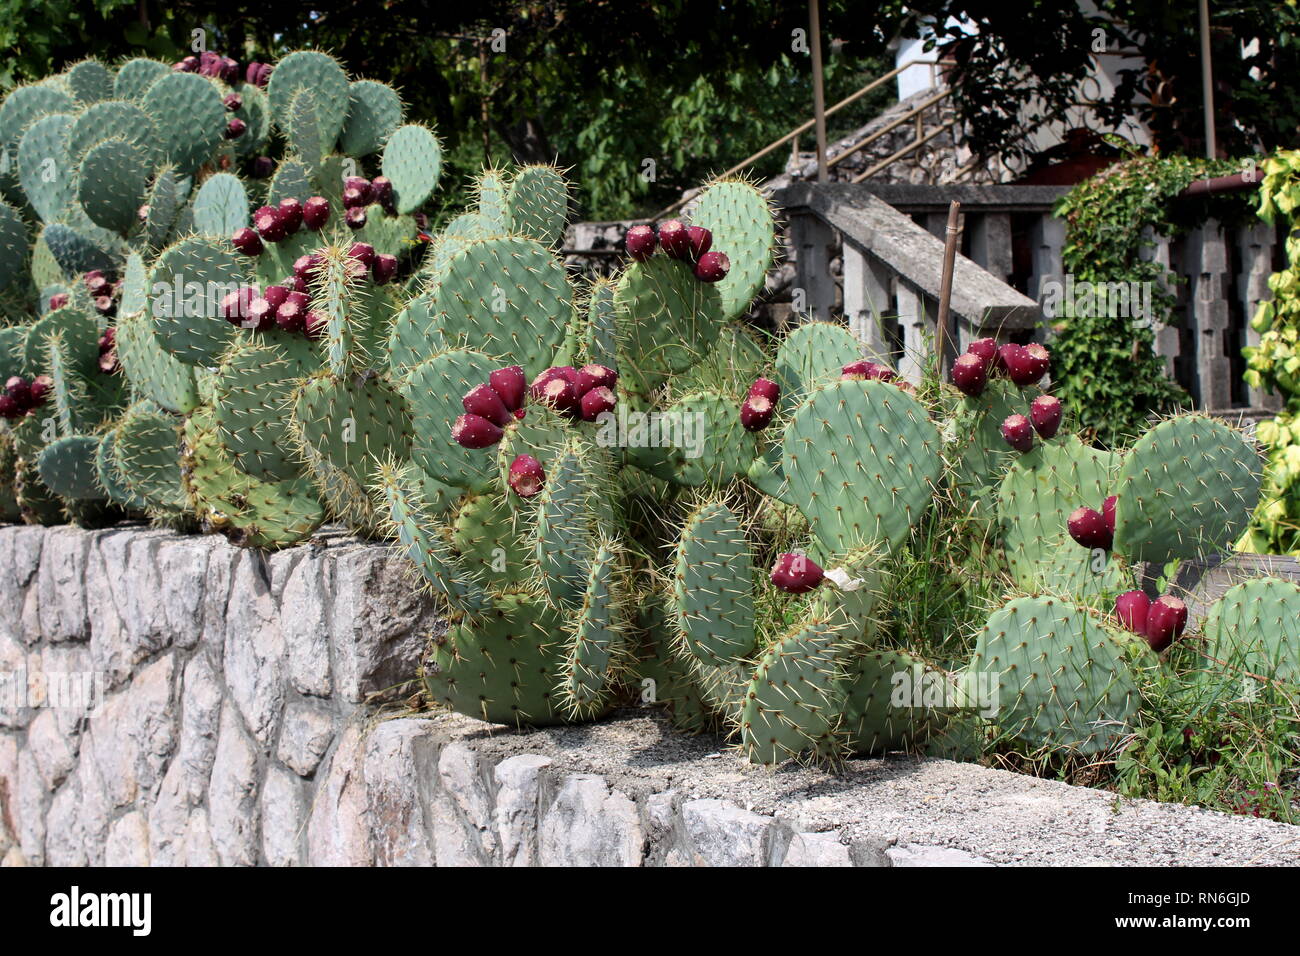 Barbary fig or Opuntia ficus-indica or Prickly pear or Indian fig opuntia or Cactus pear or Spineless cactus plants with multiple fresh brown fruits Stock Photo